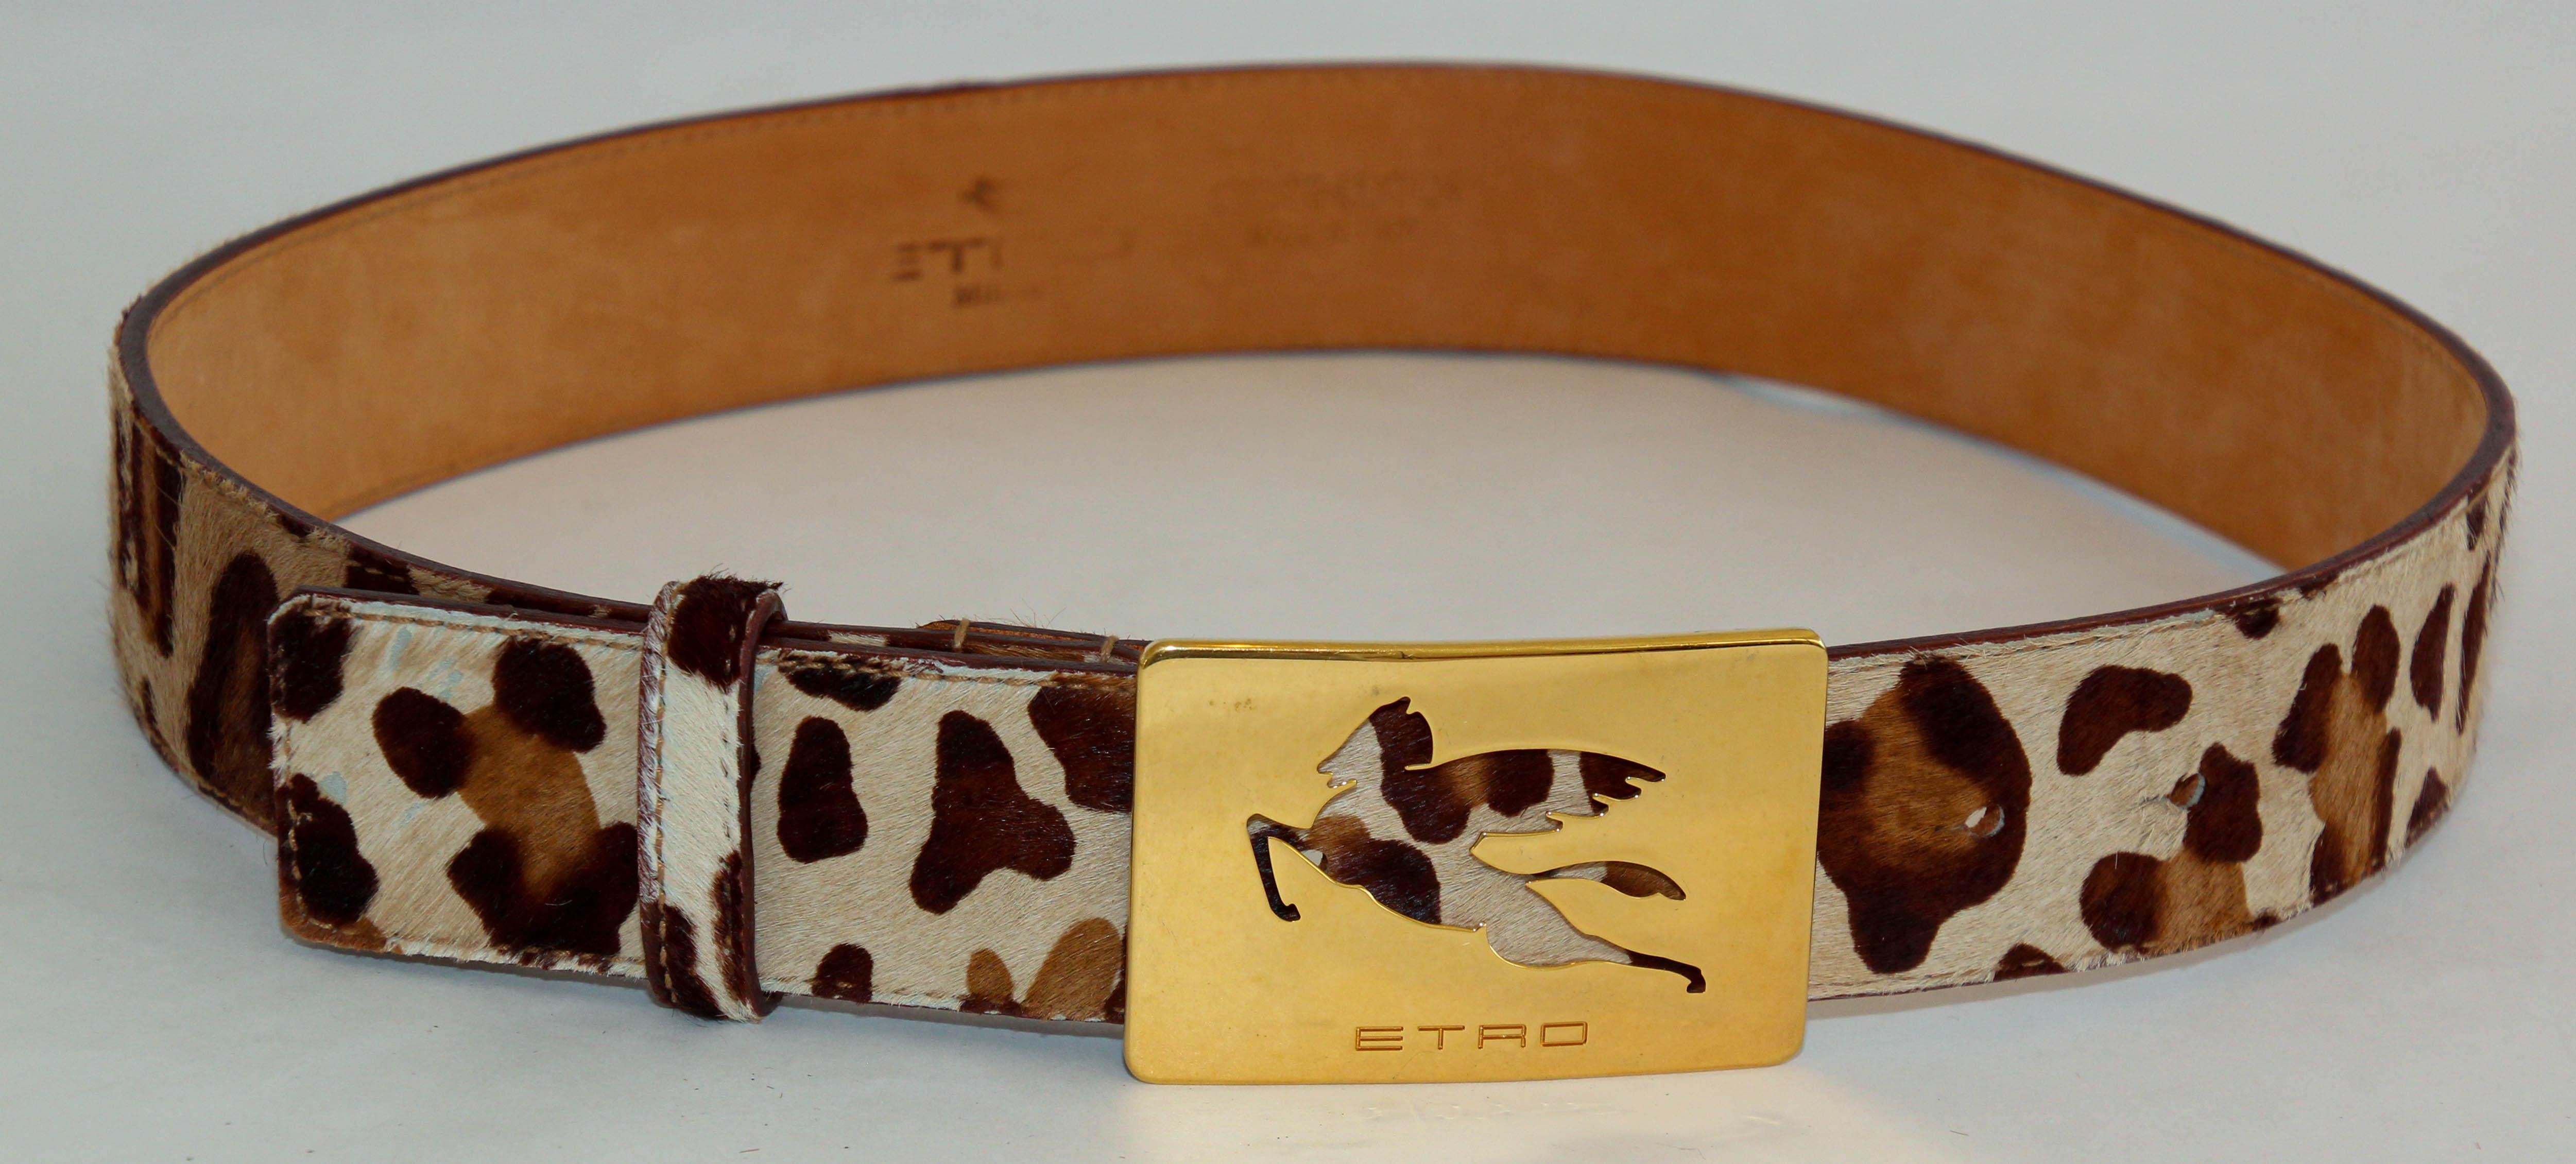 ETRO Leopard-Print Leather Belt with the Iconic Pegaso Brass Buckle For Sale 4